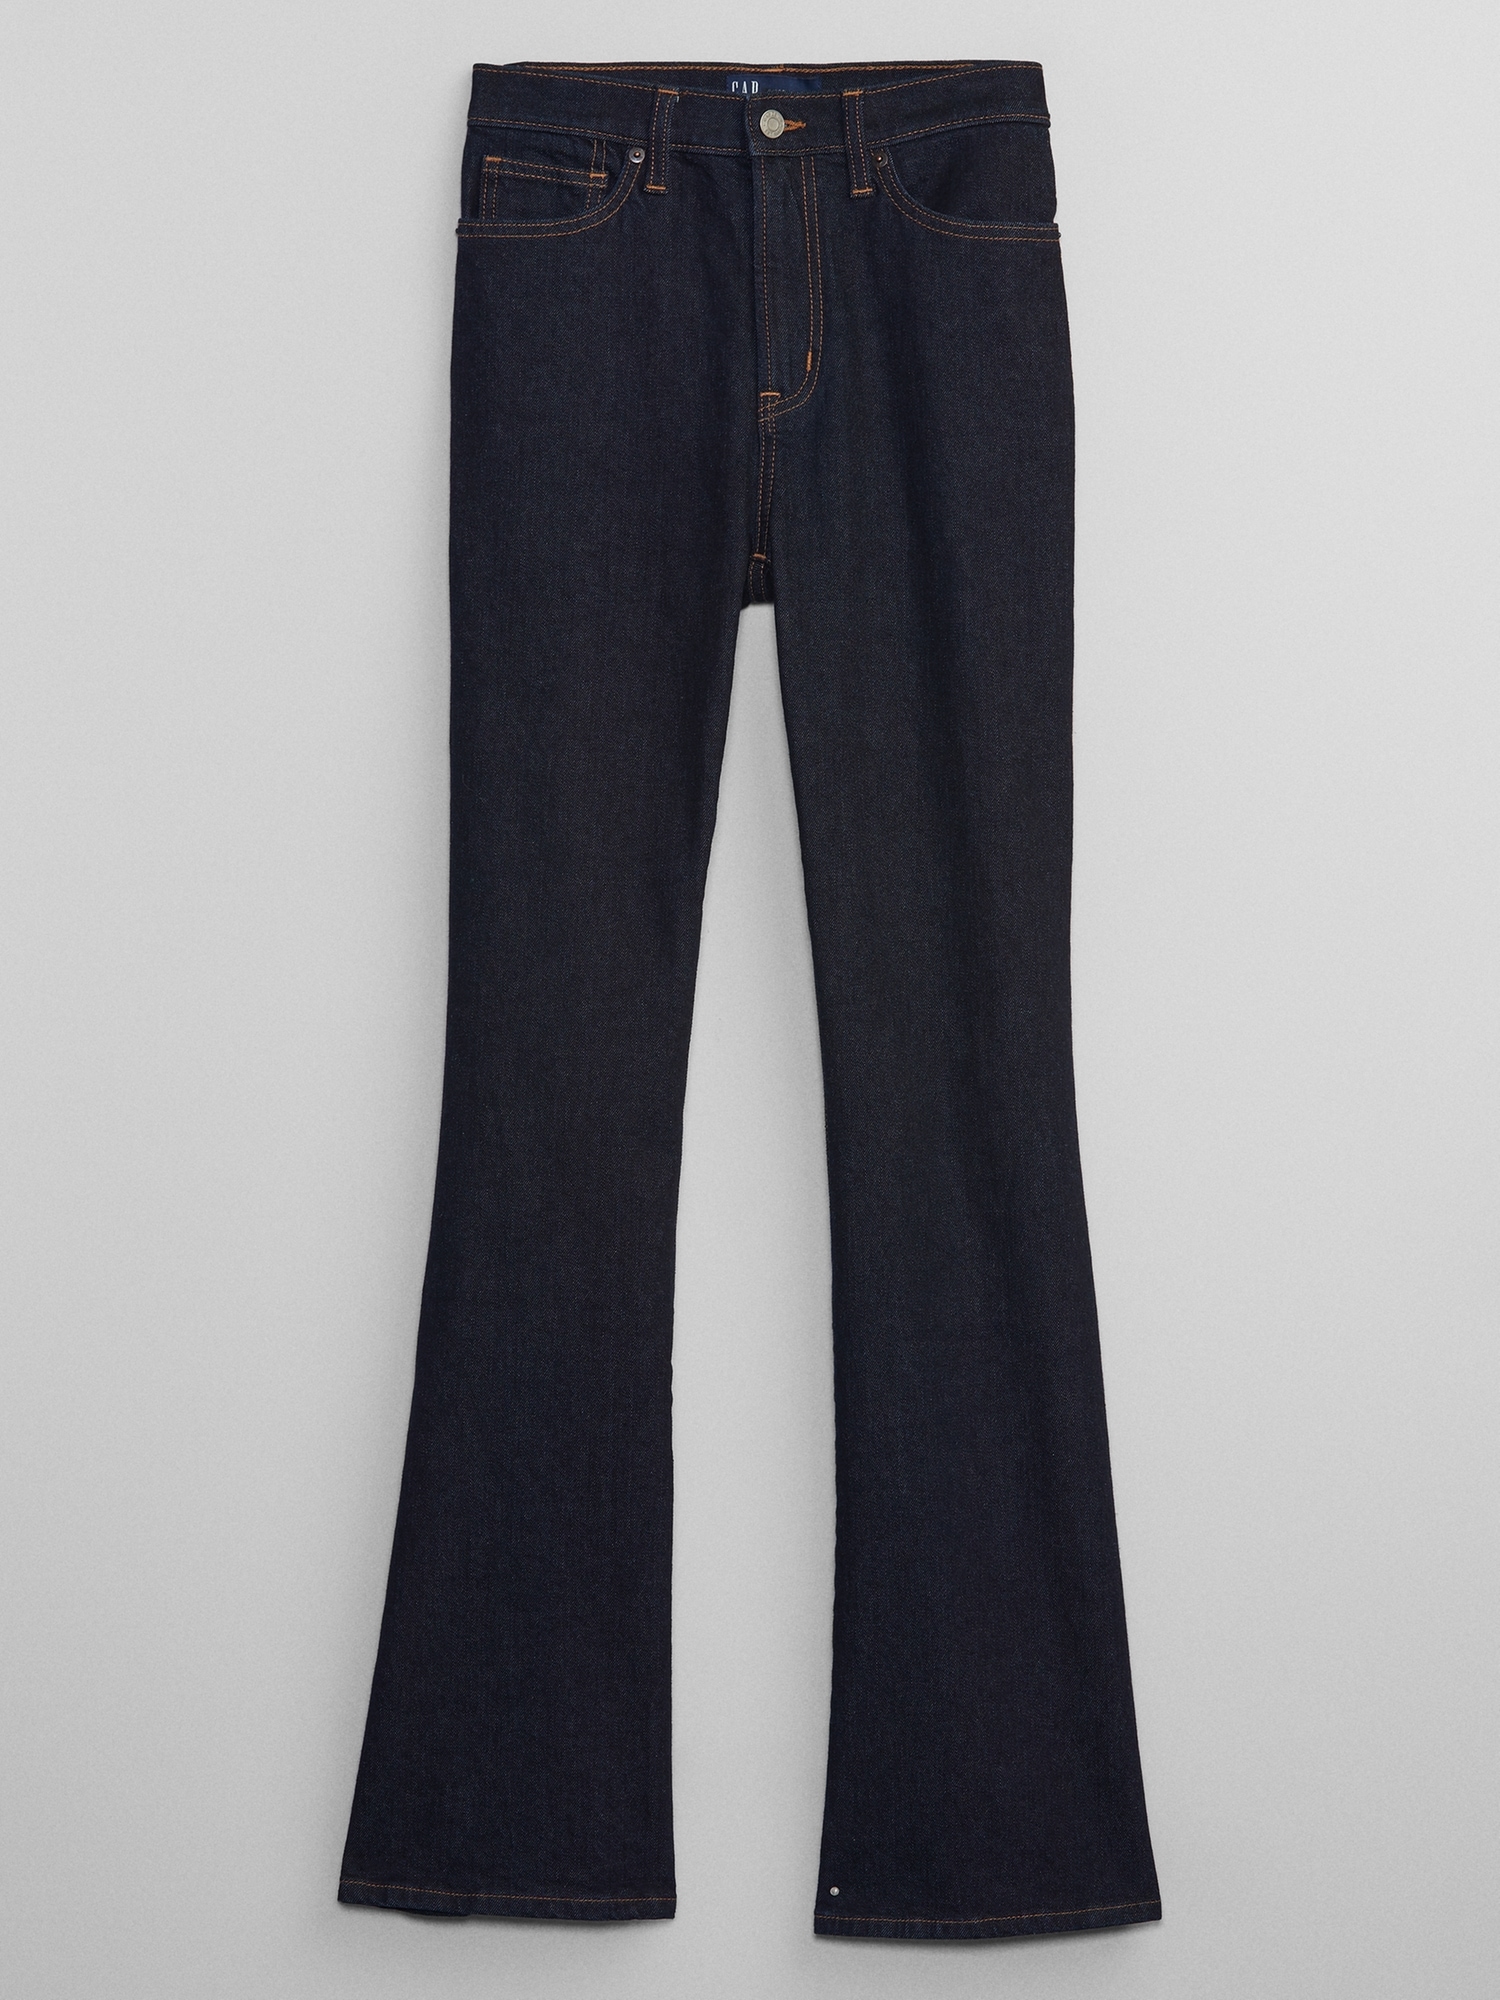 Gap x LoveShackFancy High Rise Floral '70s Flare Jeans with Washwell Indigo  Flowers - FW23 - US